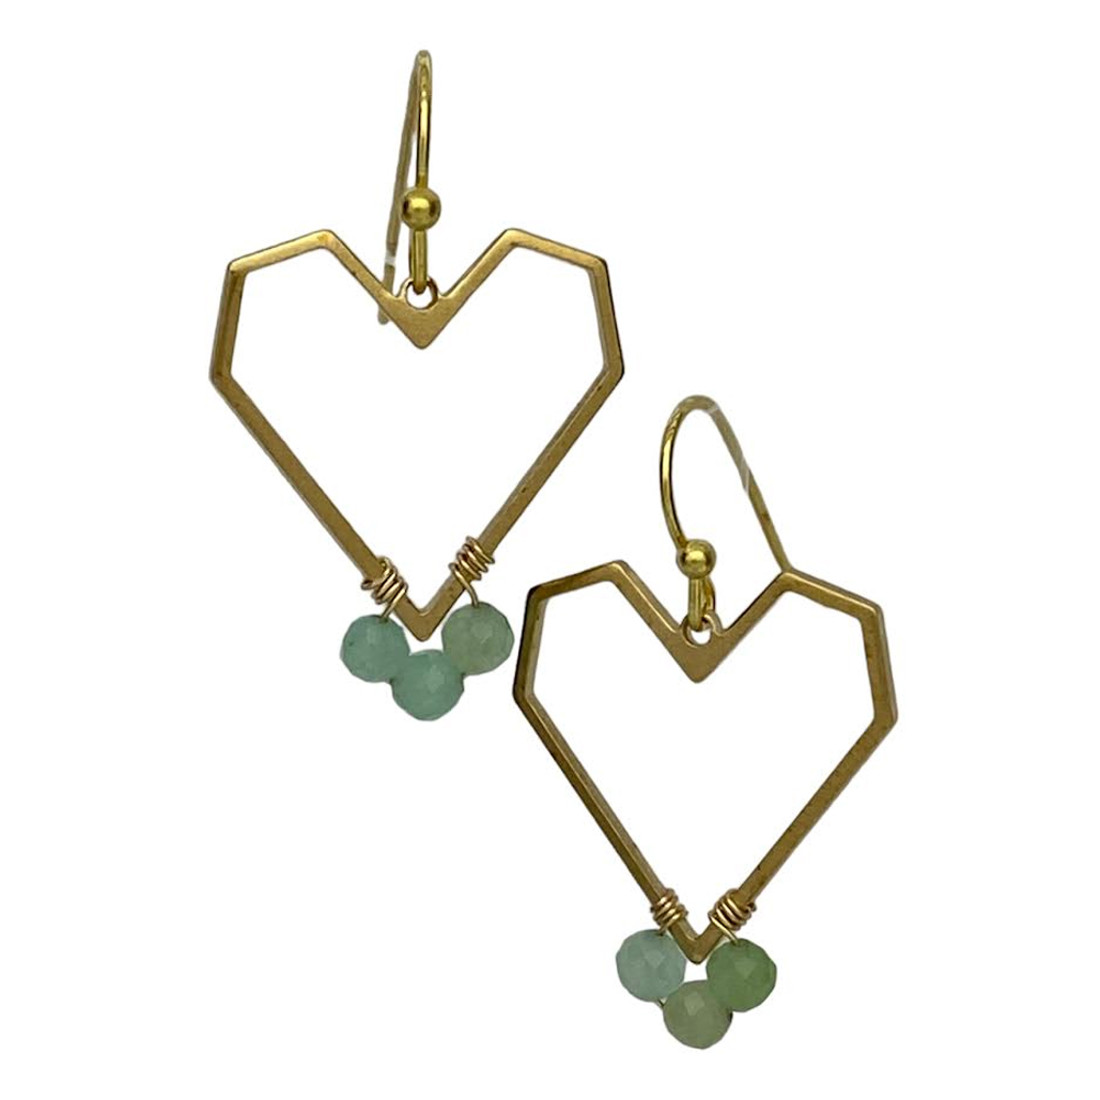 Heart Earrings with Chrysoprase Beads